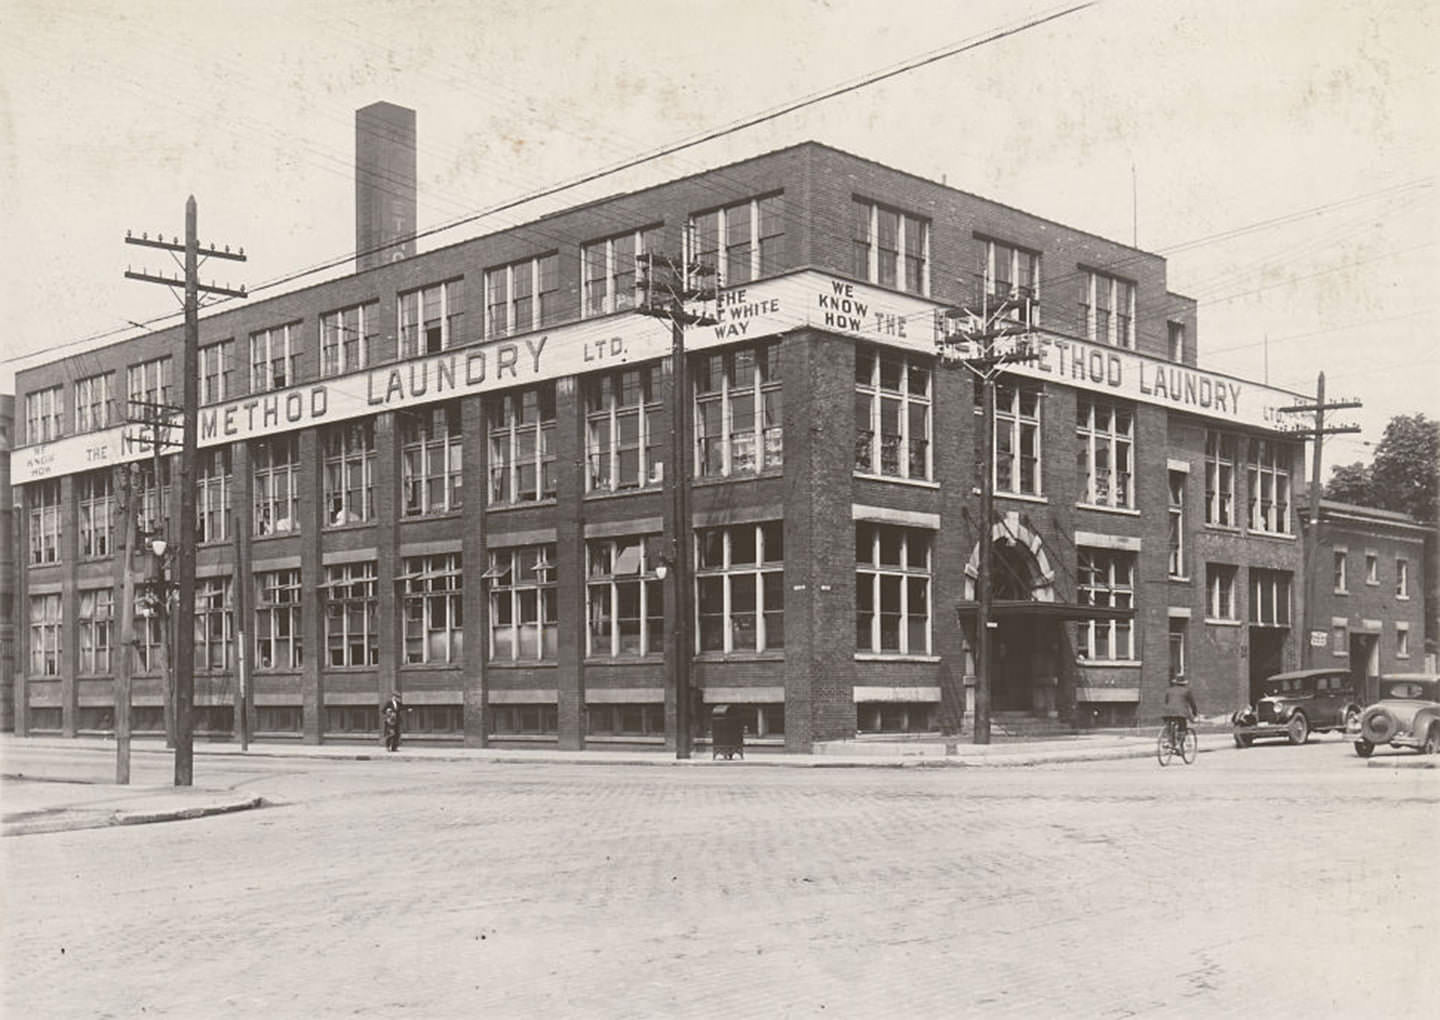 New Method Laundry Company Limited building, northwest corner of Queen St. E. and River St., 1929